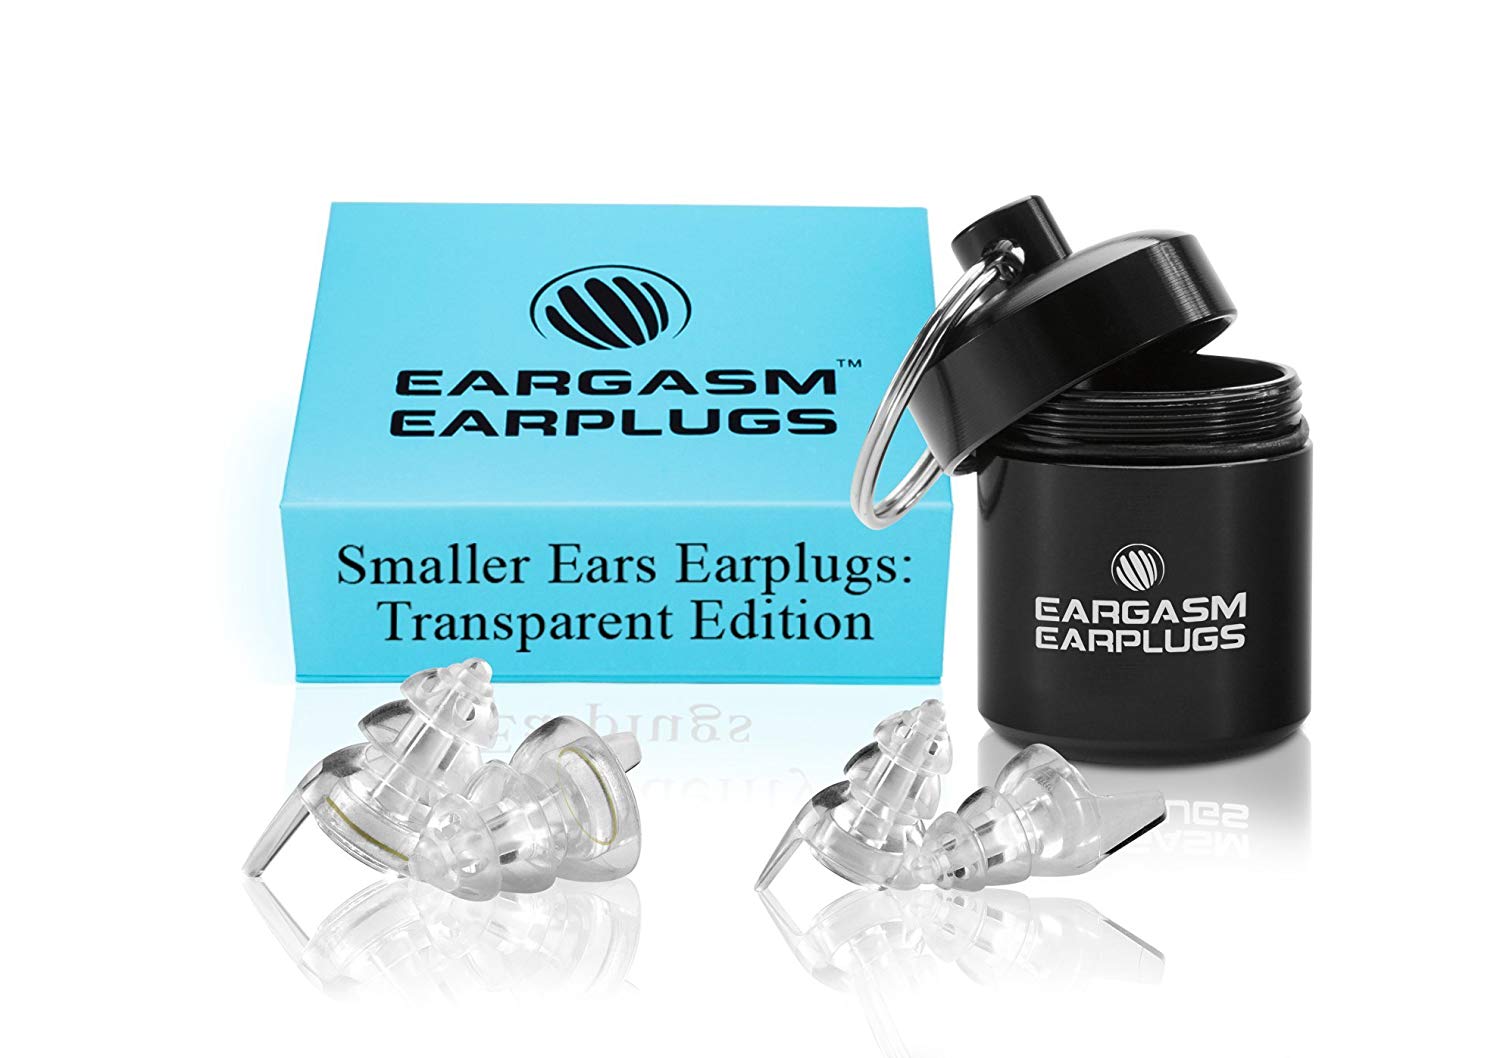 Eargasm Smaller Ears Earplugs for Concerts Musicians Motorcycles Noise Sensitivity Disorders and More! Two Different Sizes Included to Accommodate Sma 1